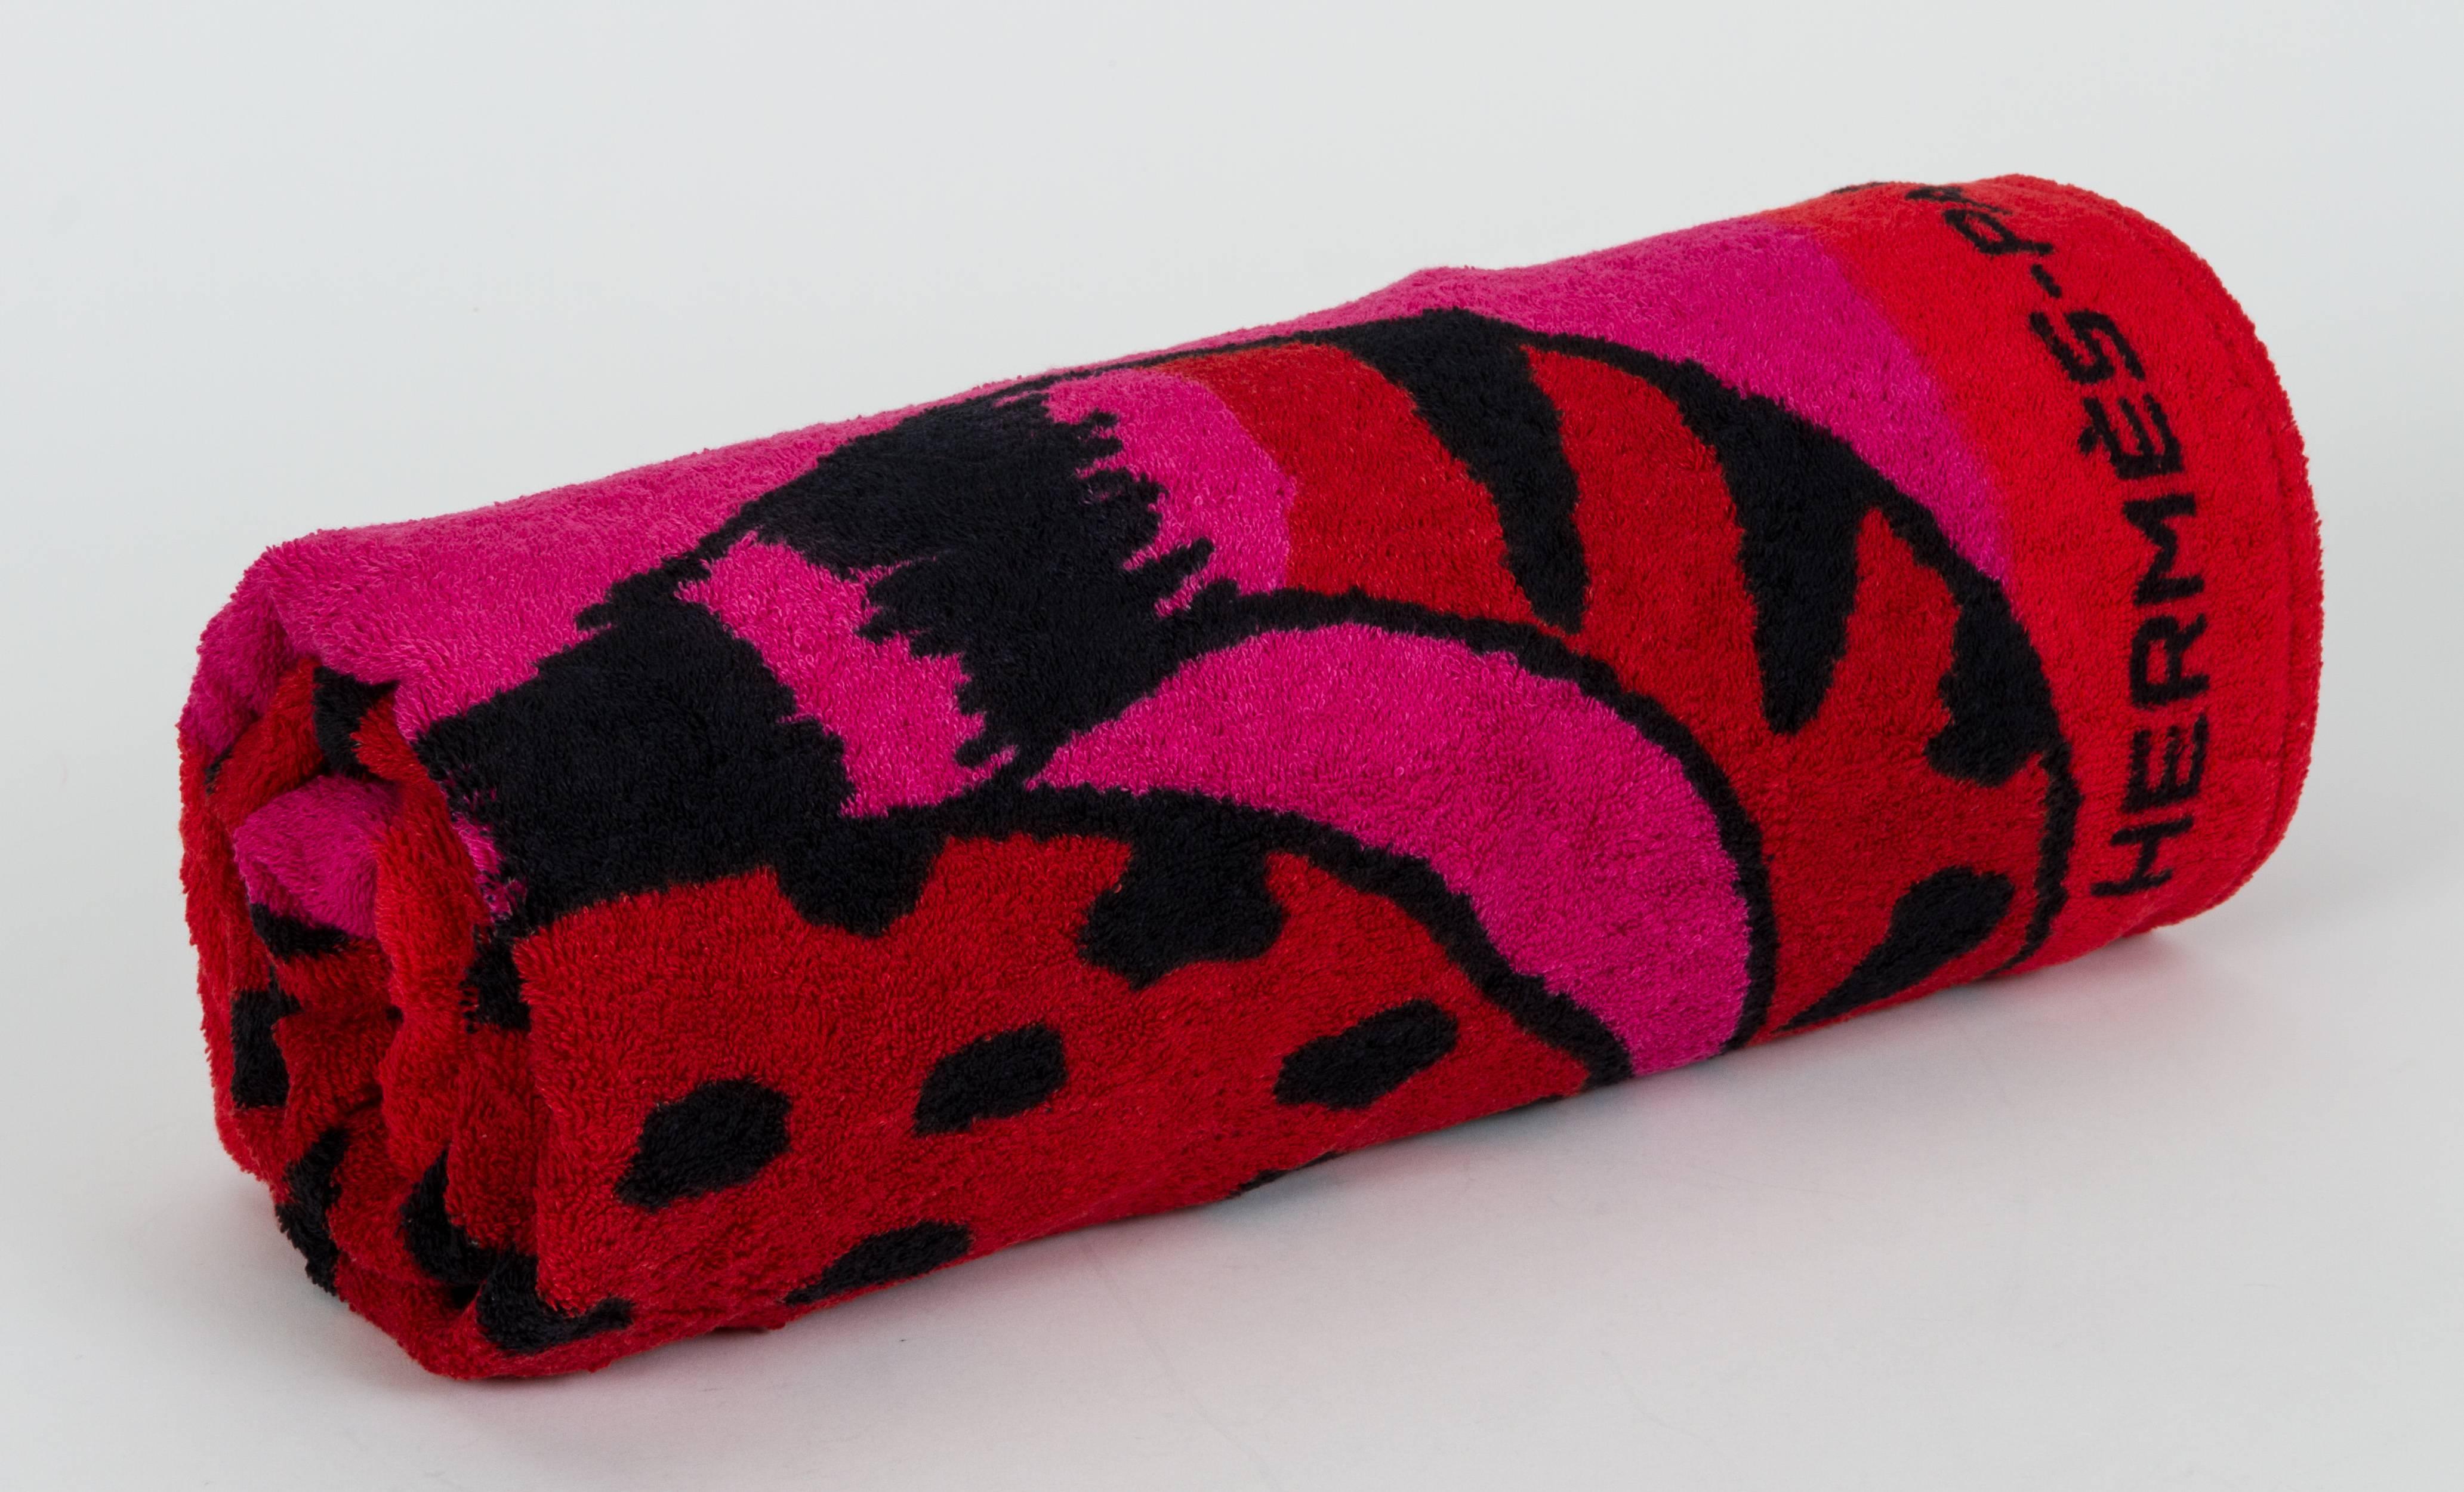 Hermès new collection feline towel in red, fucsia and black combination. Cotton terry cloth
